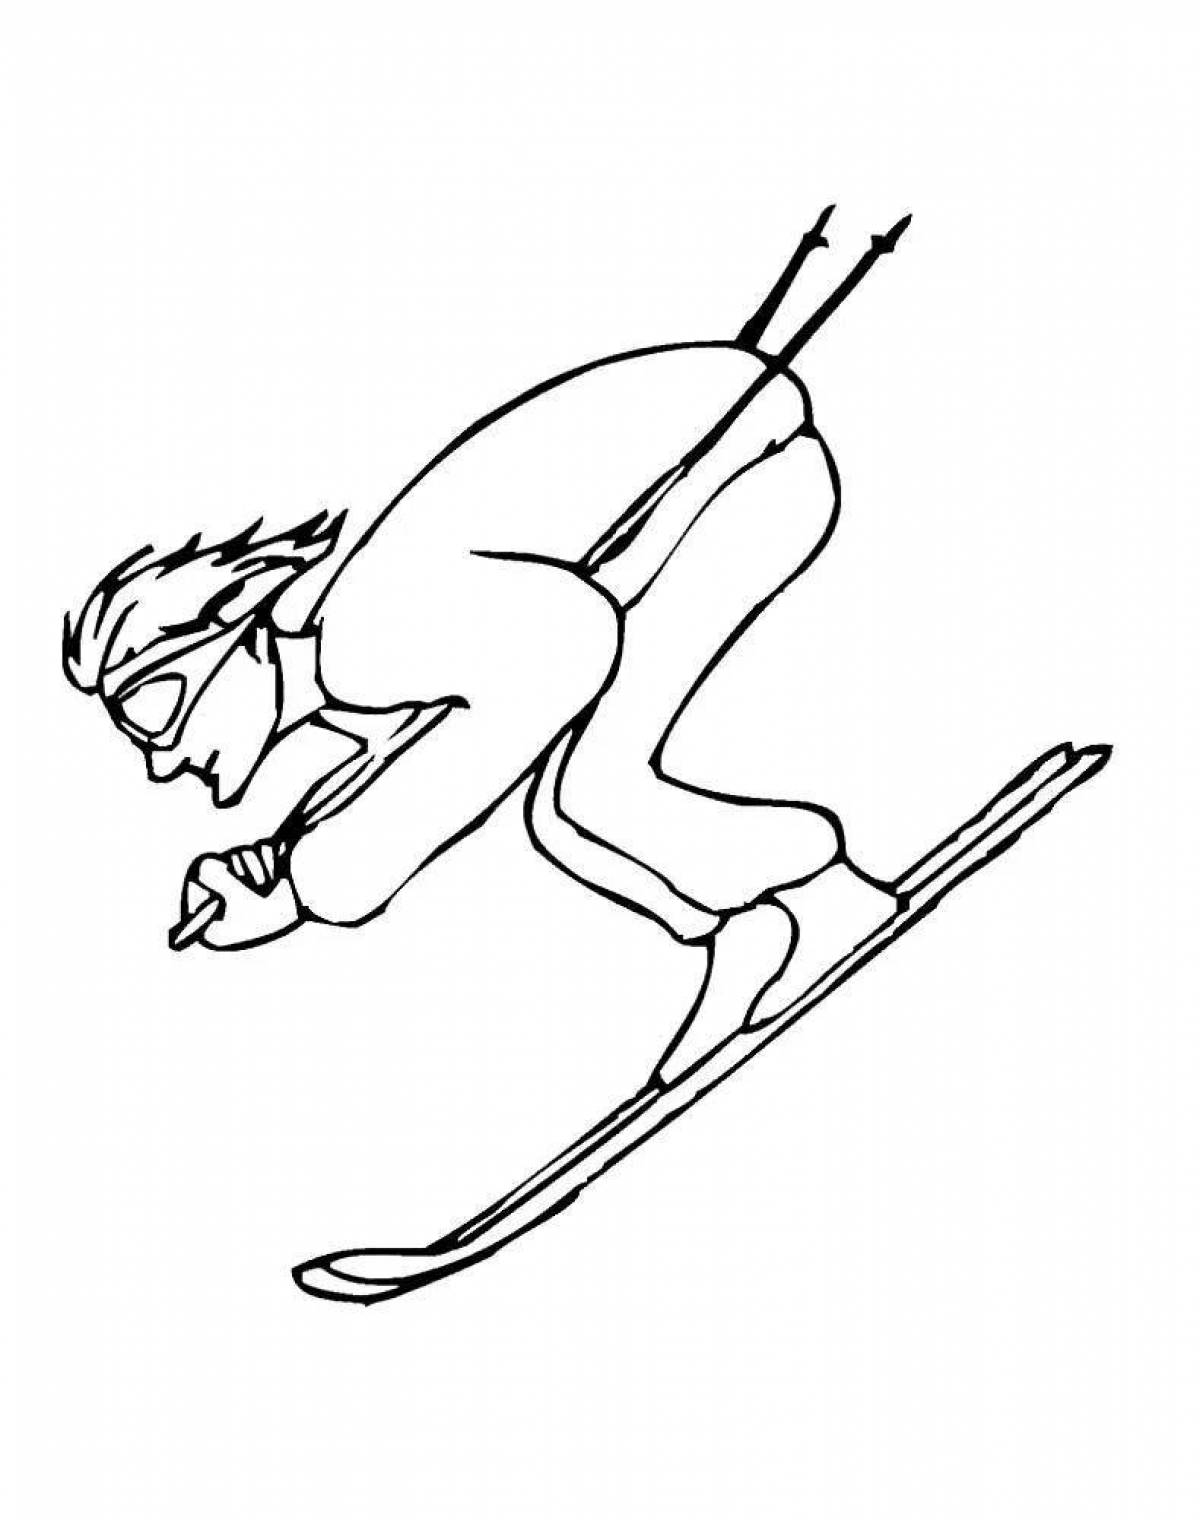 Dynamic skier on the move